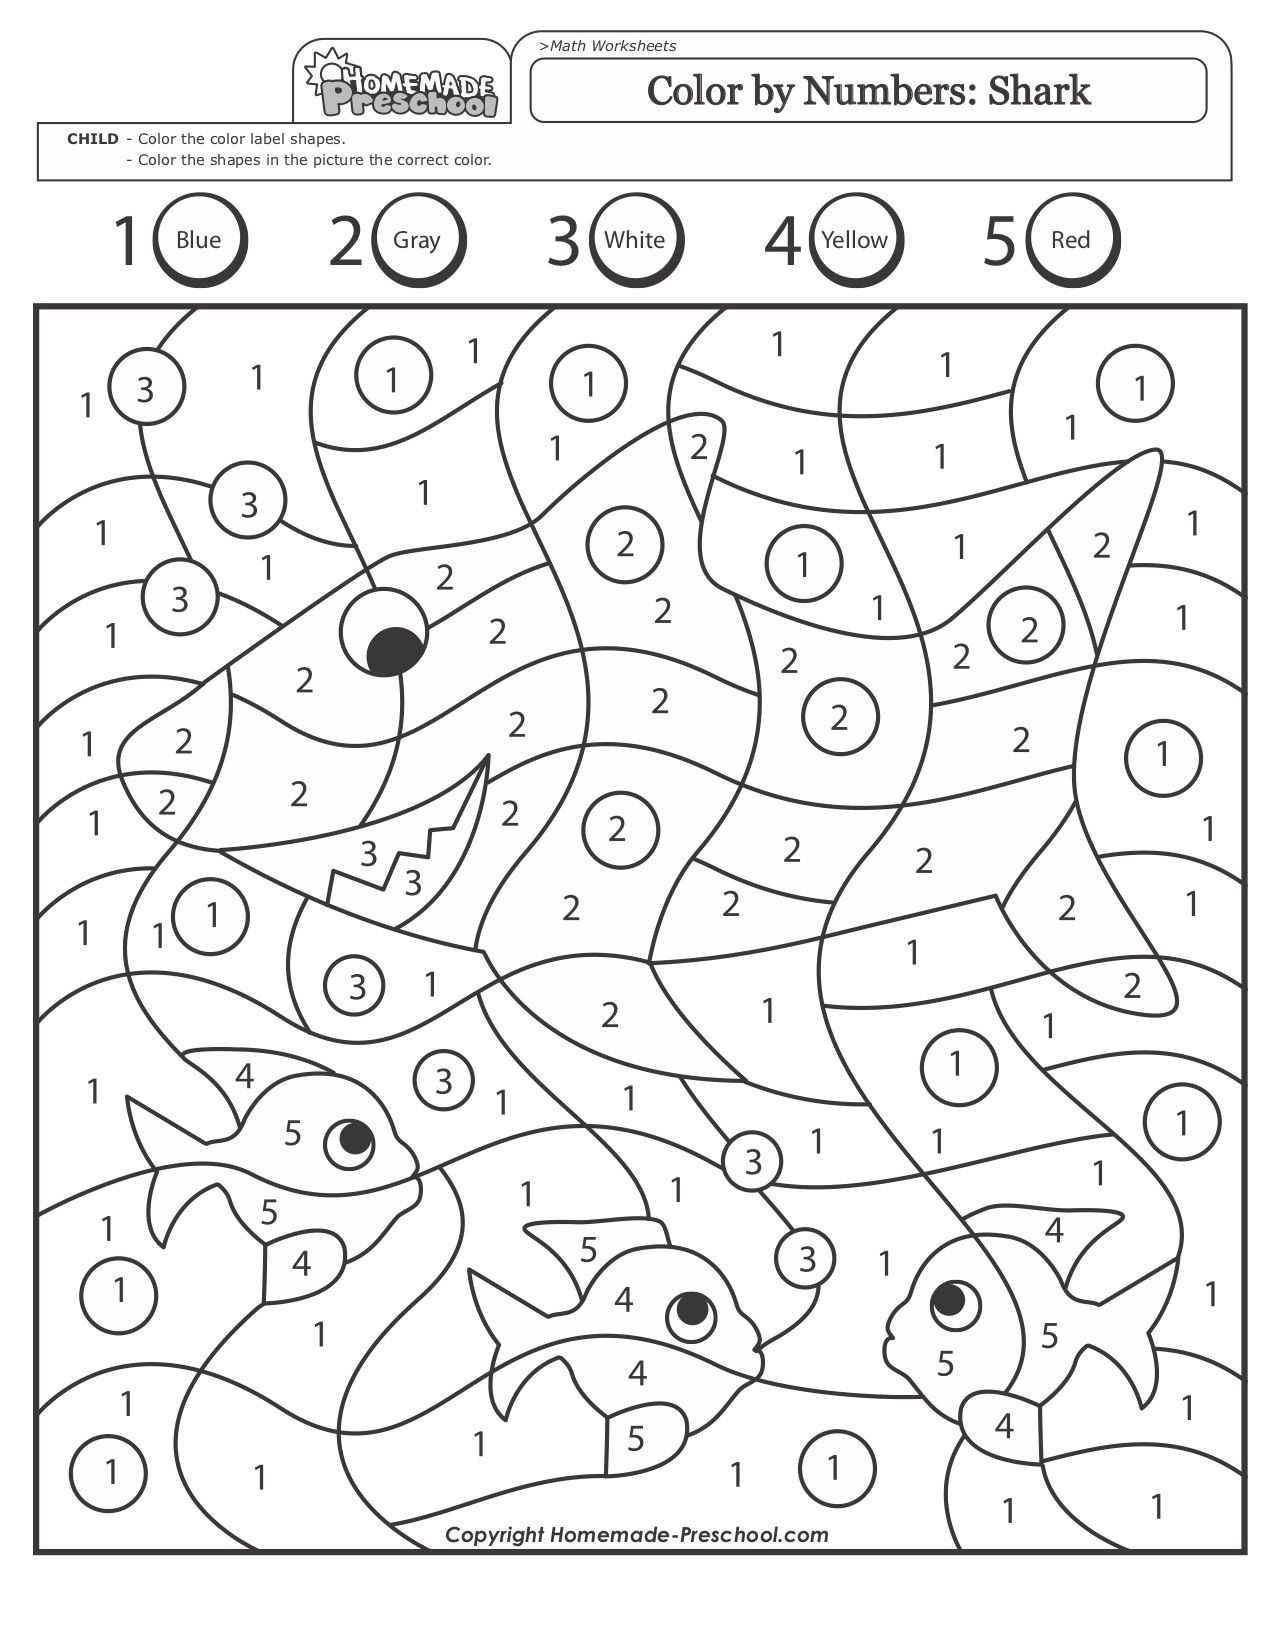 Kindergarten Color by Number Worksheets Pin by Gracie Barrios On Teaching